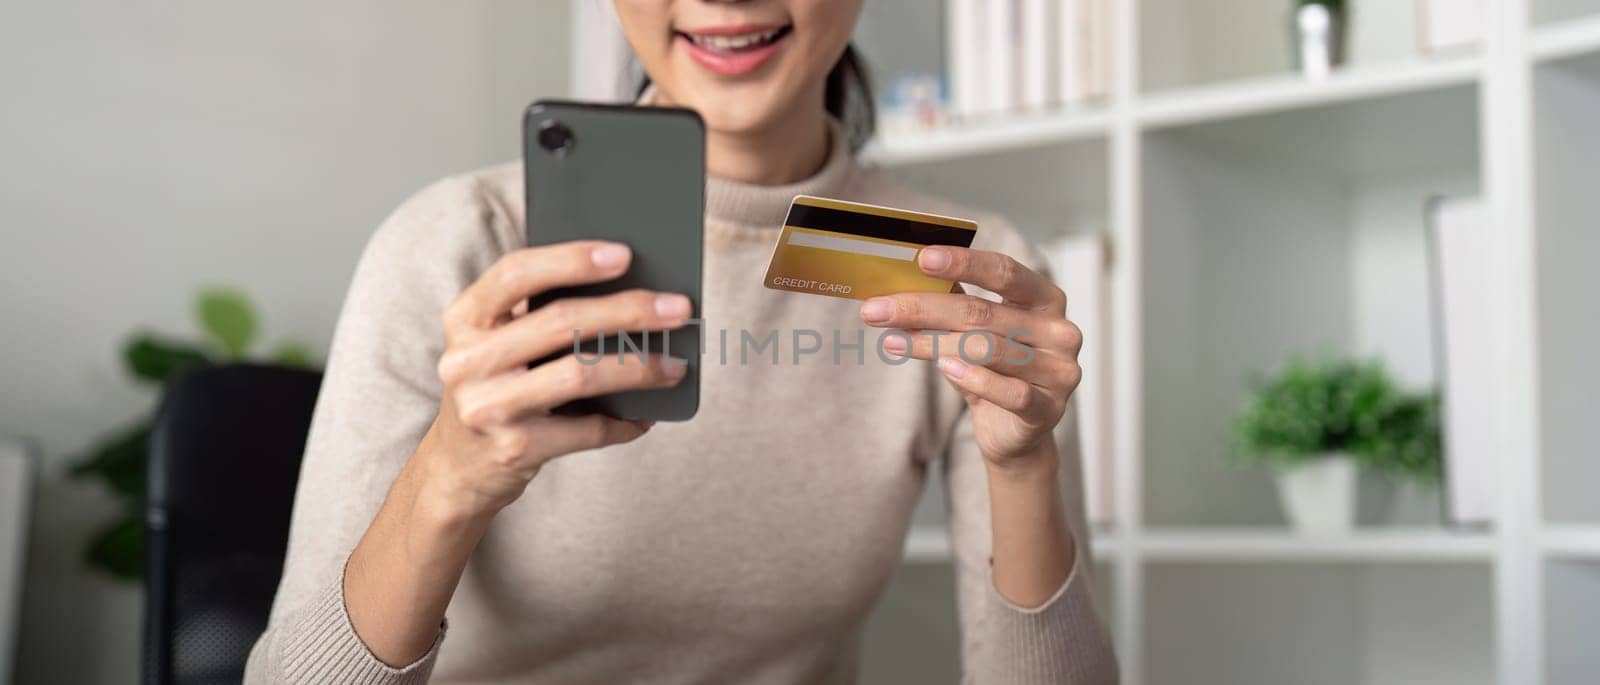 Asian female holding smartphone and credit card, using mobile banking app or online shopping app.